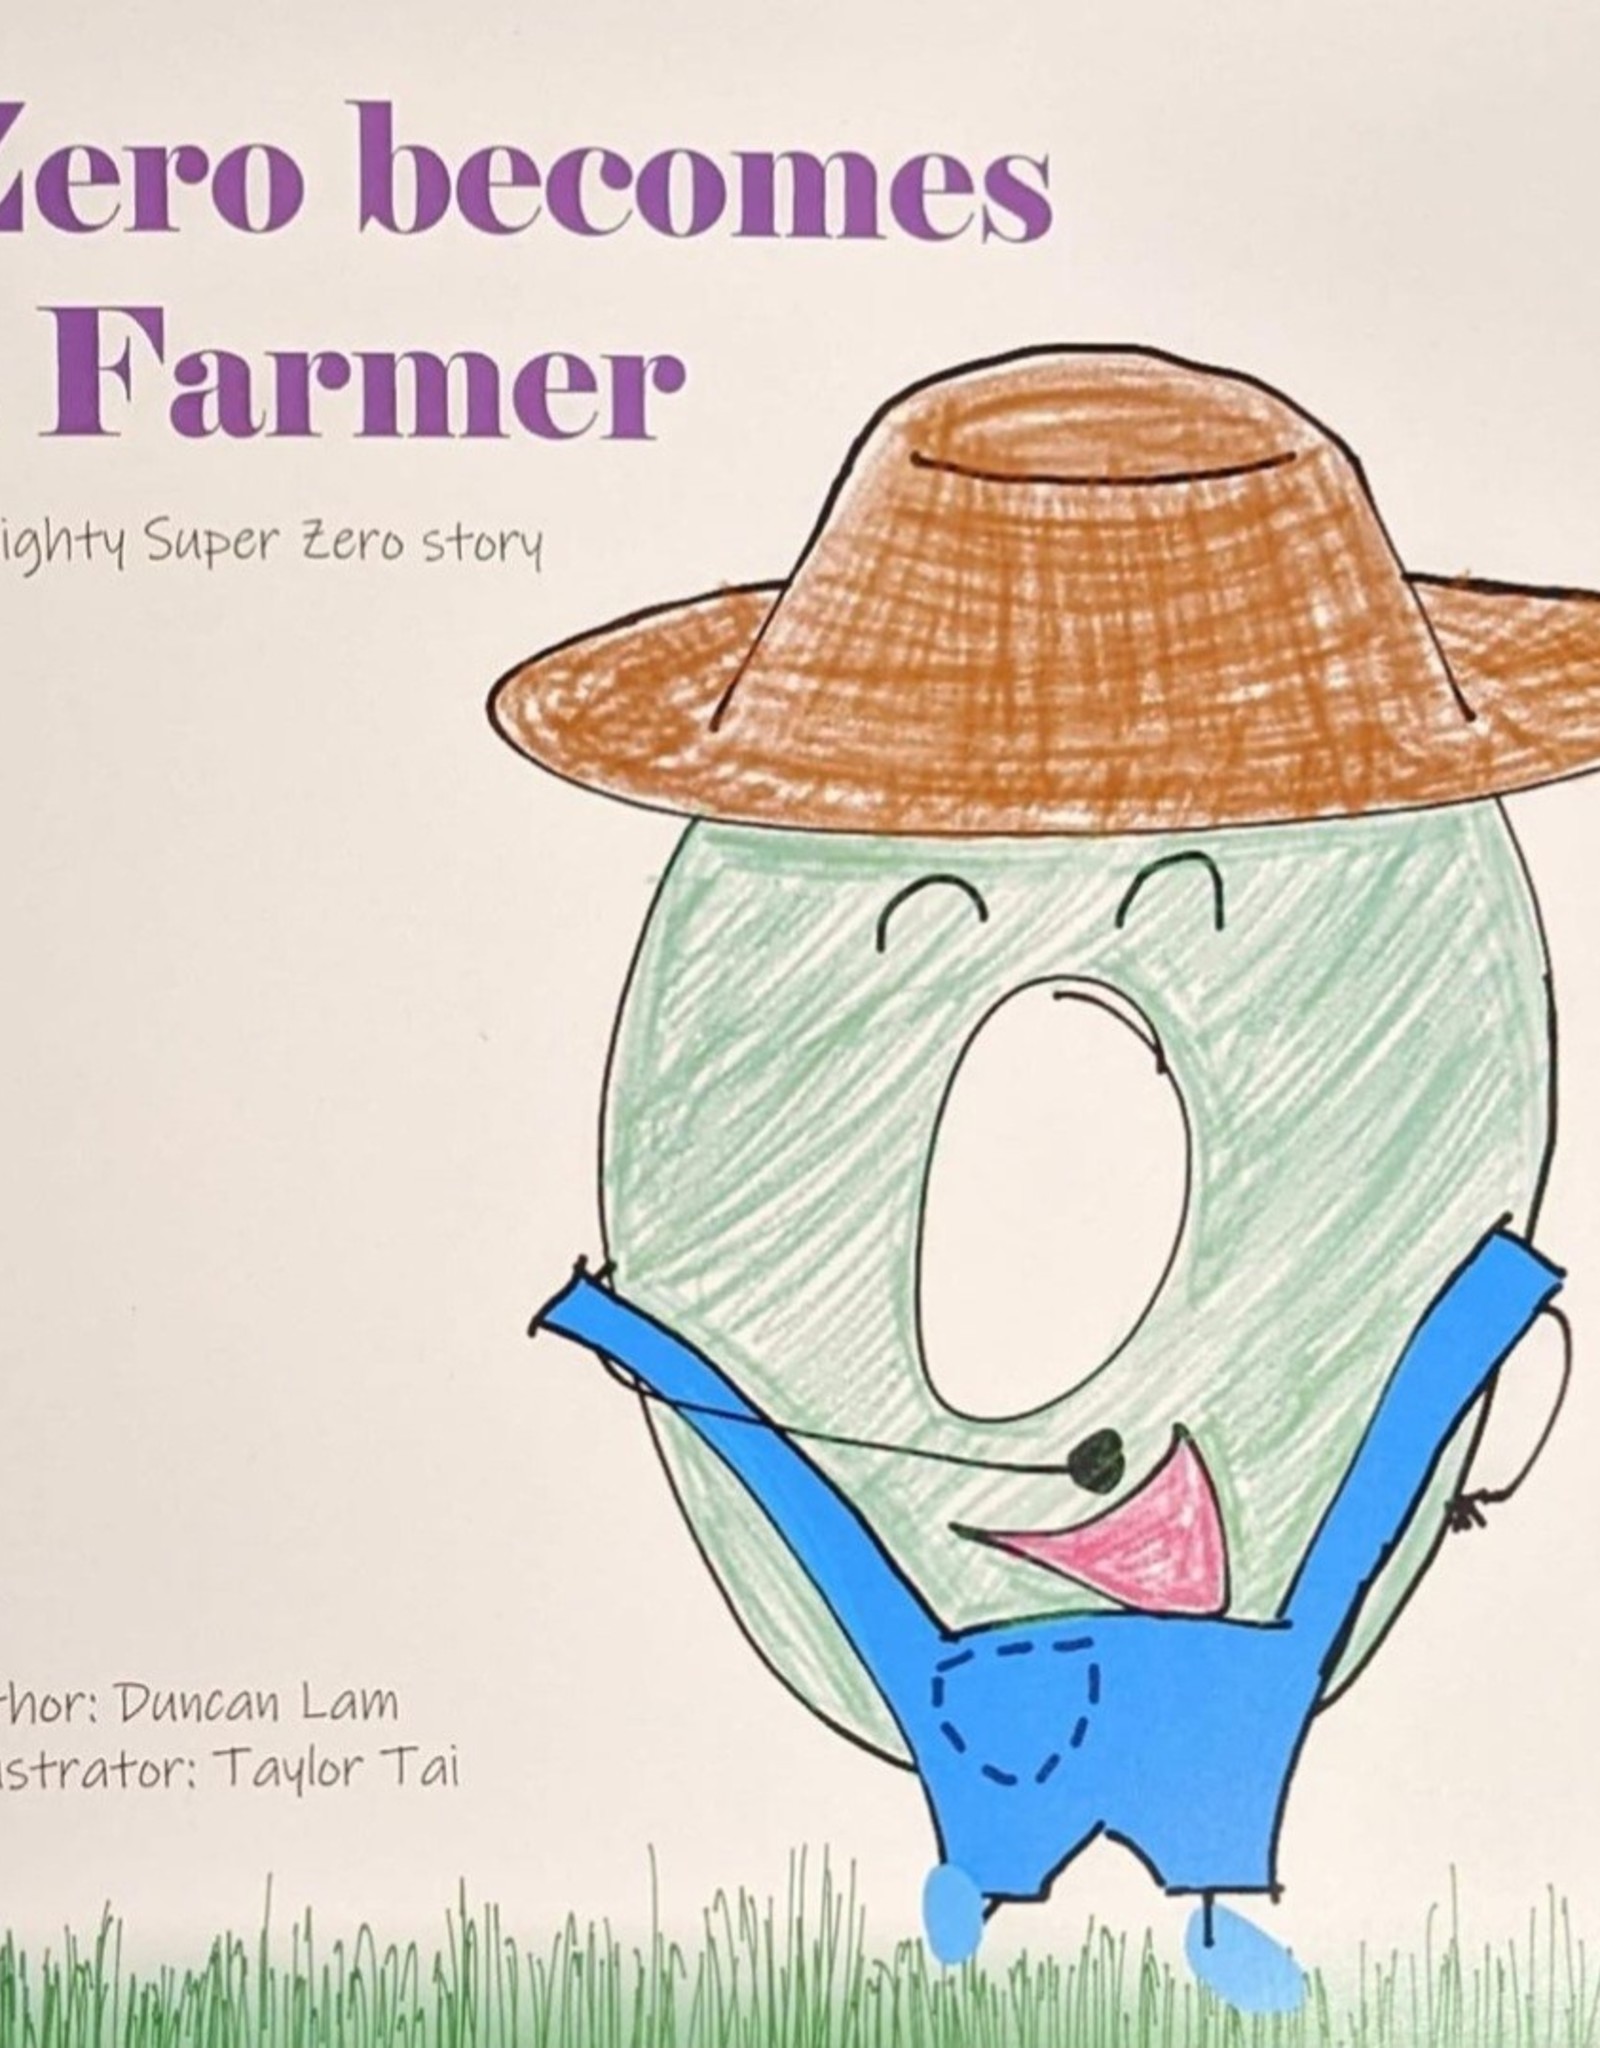 Zero becomes a Farmer by Duncan Lam